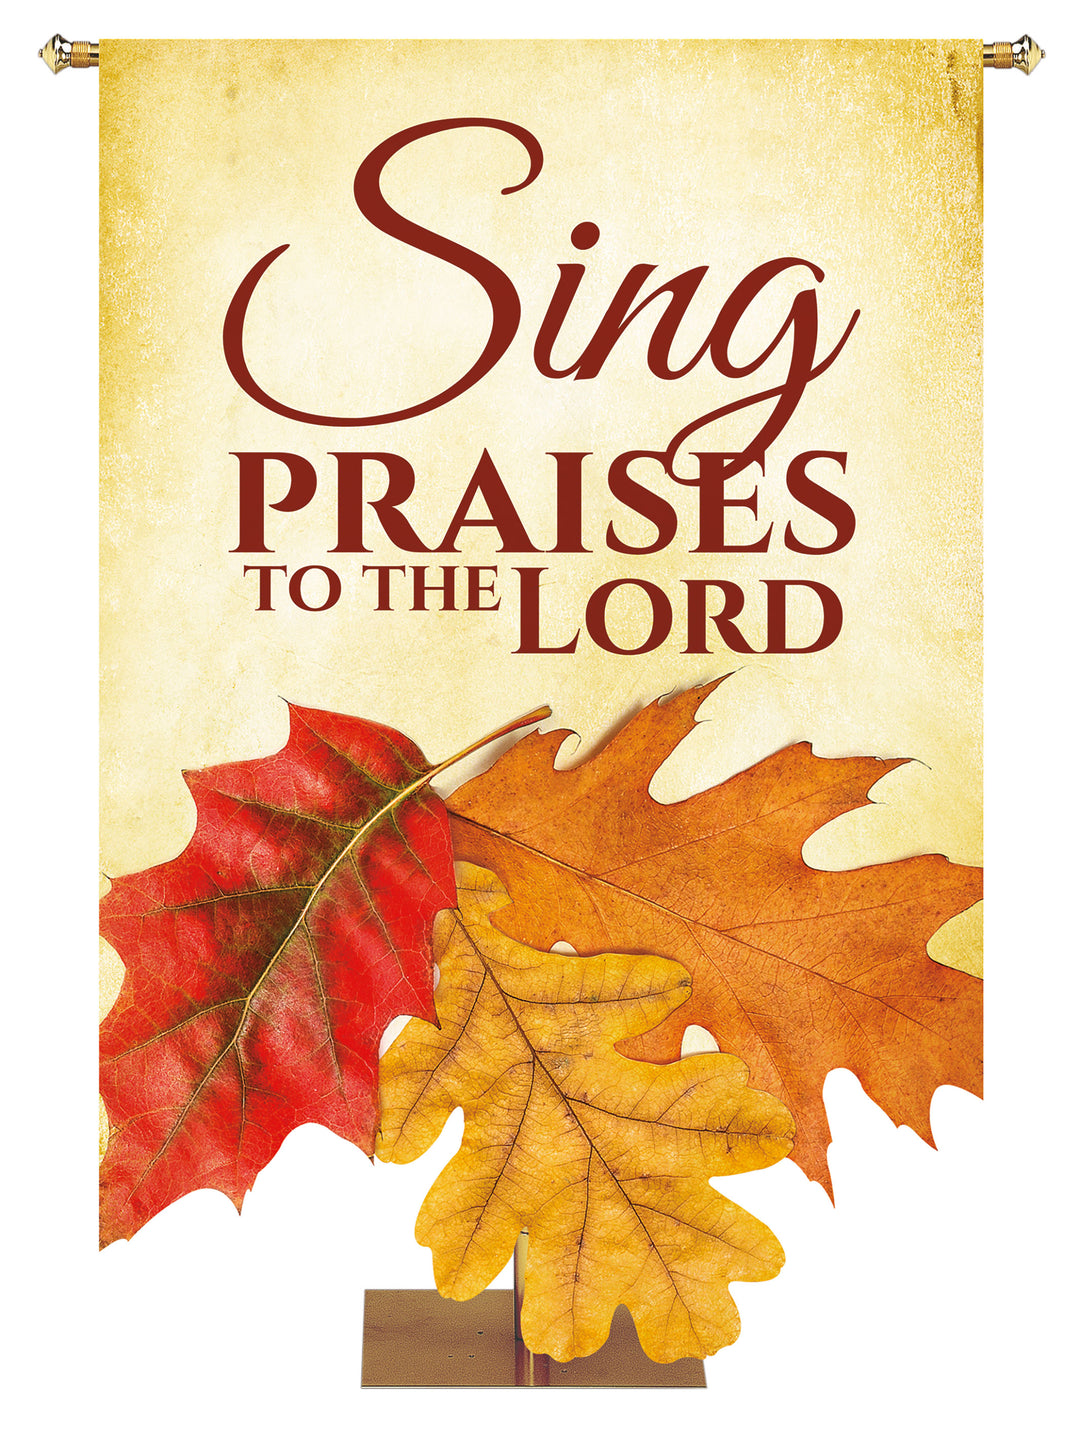 Church Banner for Autumn and Thanksgiving Sing Praises To The Lord with Sculpted Gold and Red Leaves (Right)